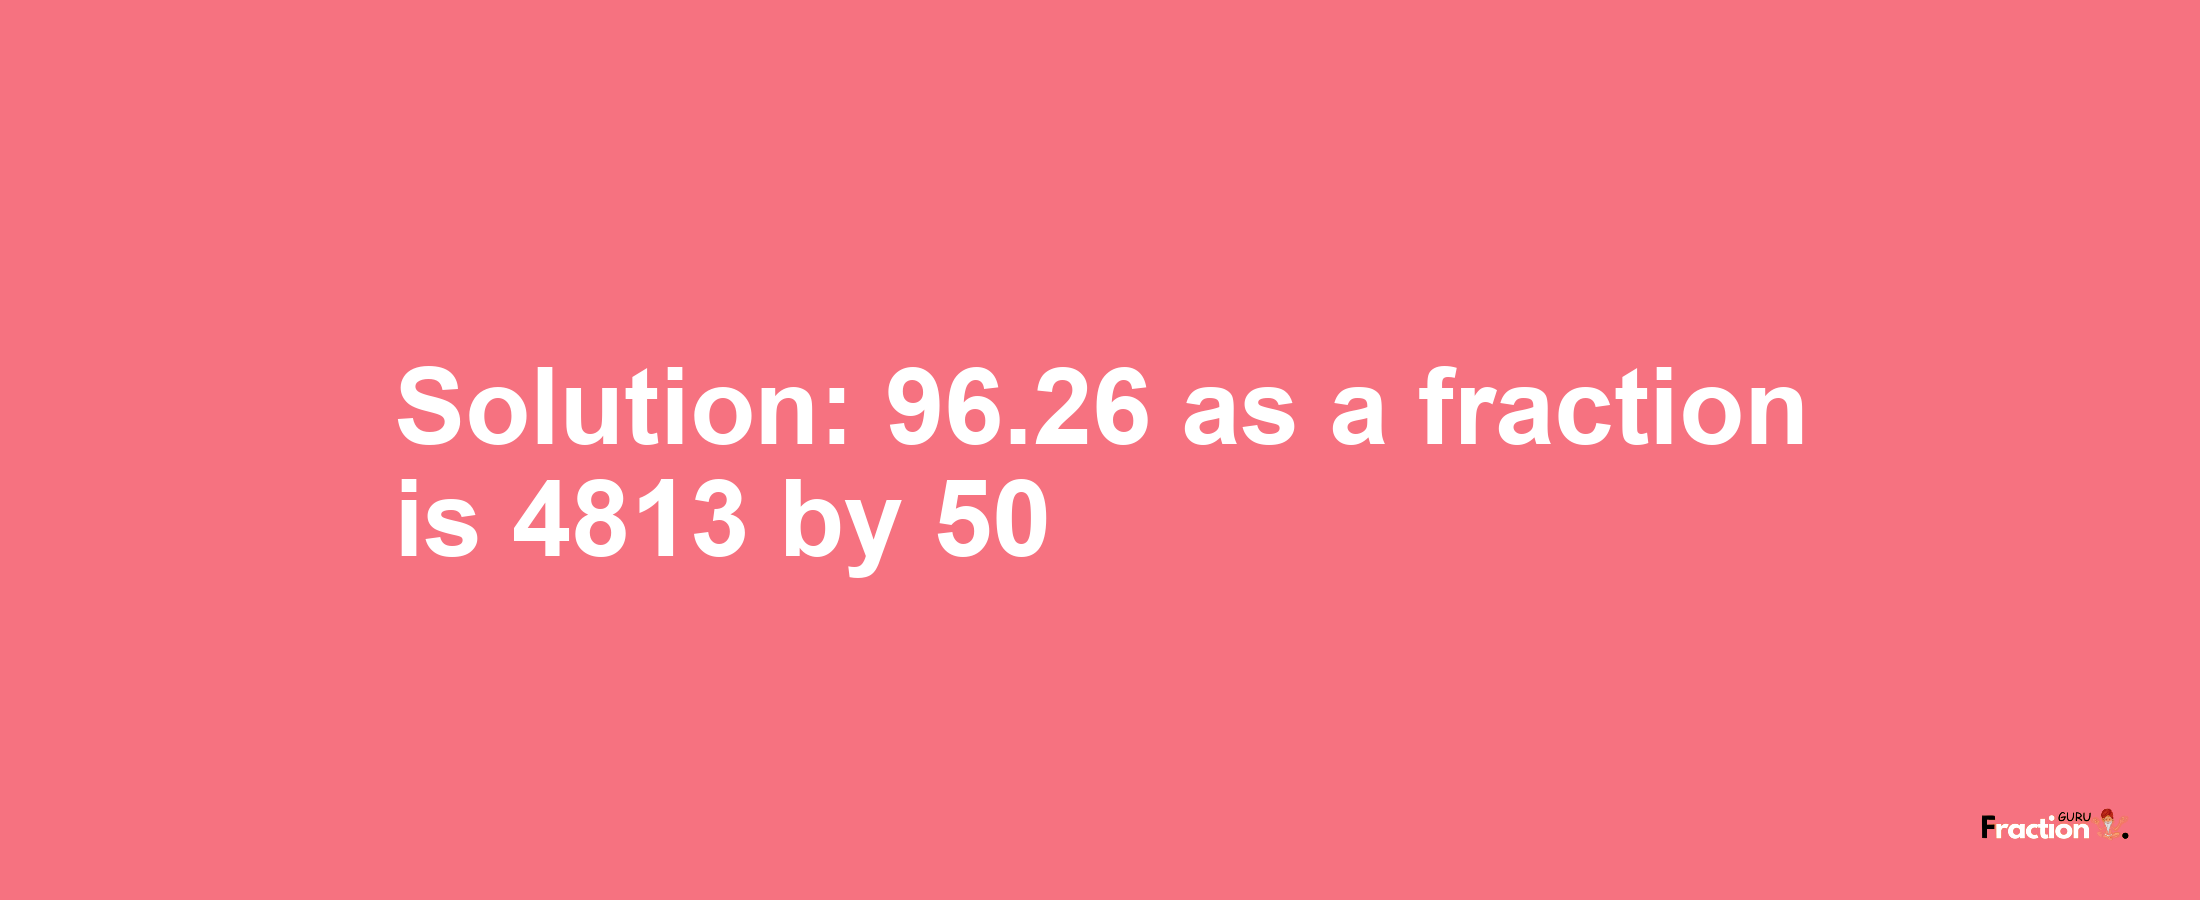 Solution:96.26 as a fraction is 4813/50